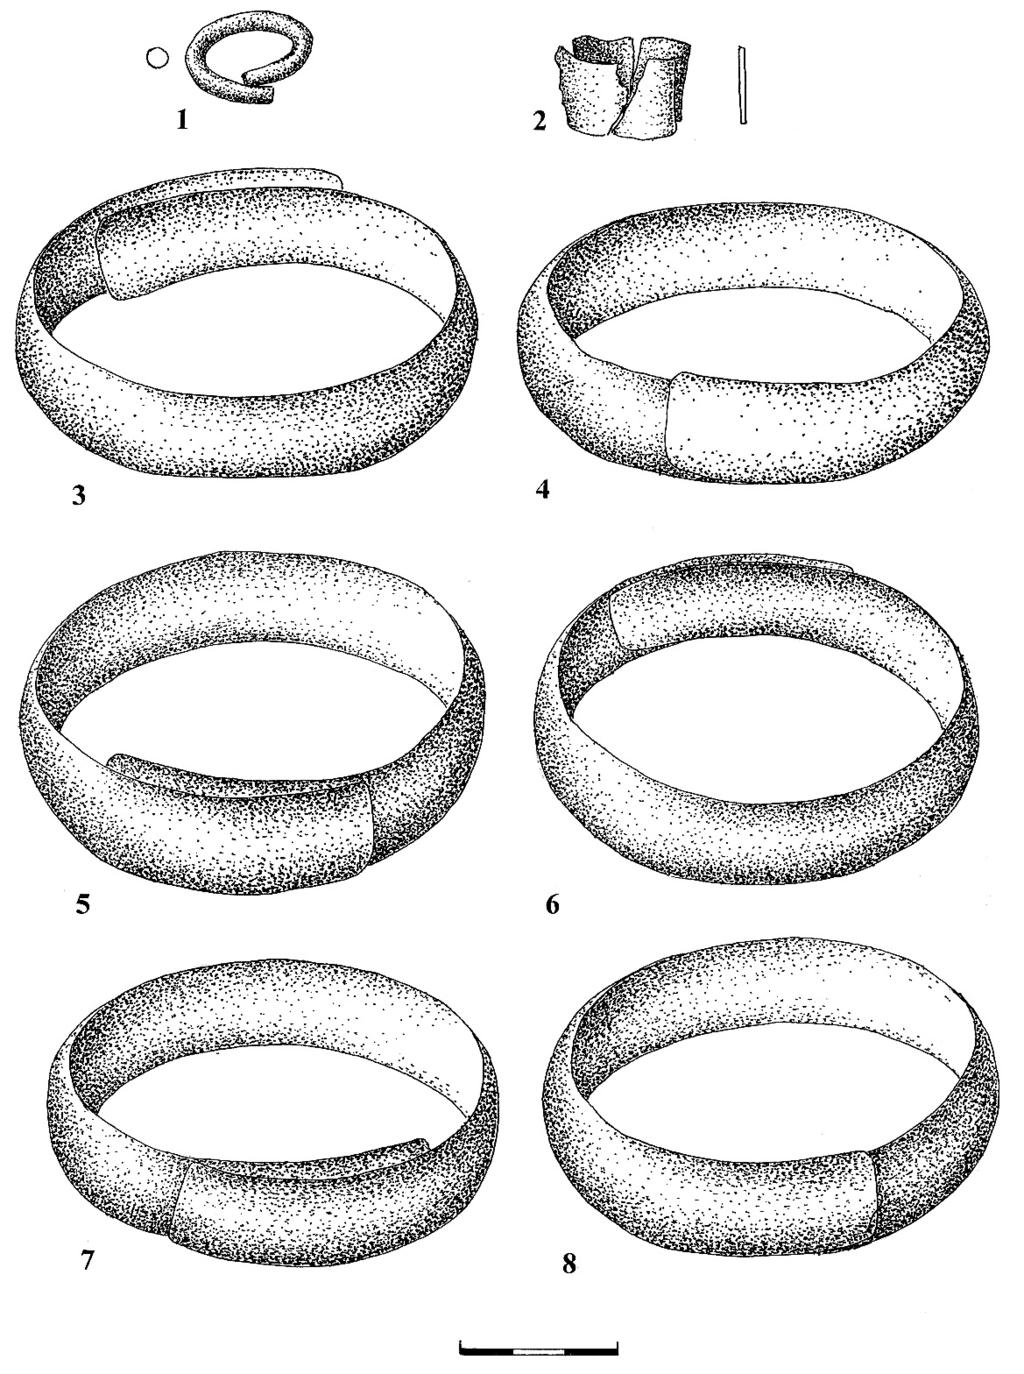 Leg rings in archaeological material from Latvia Fig. 4.